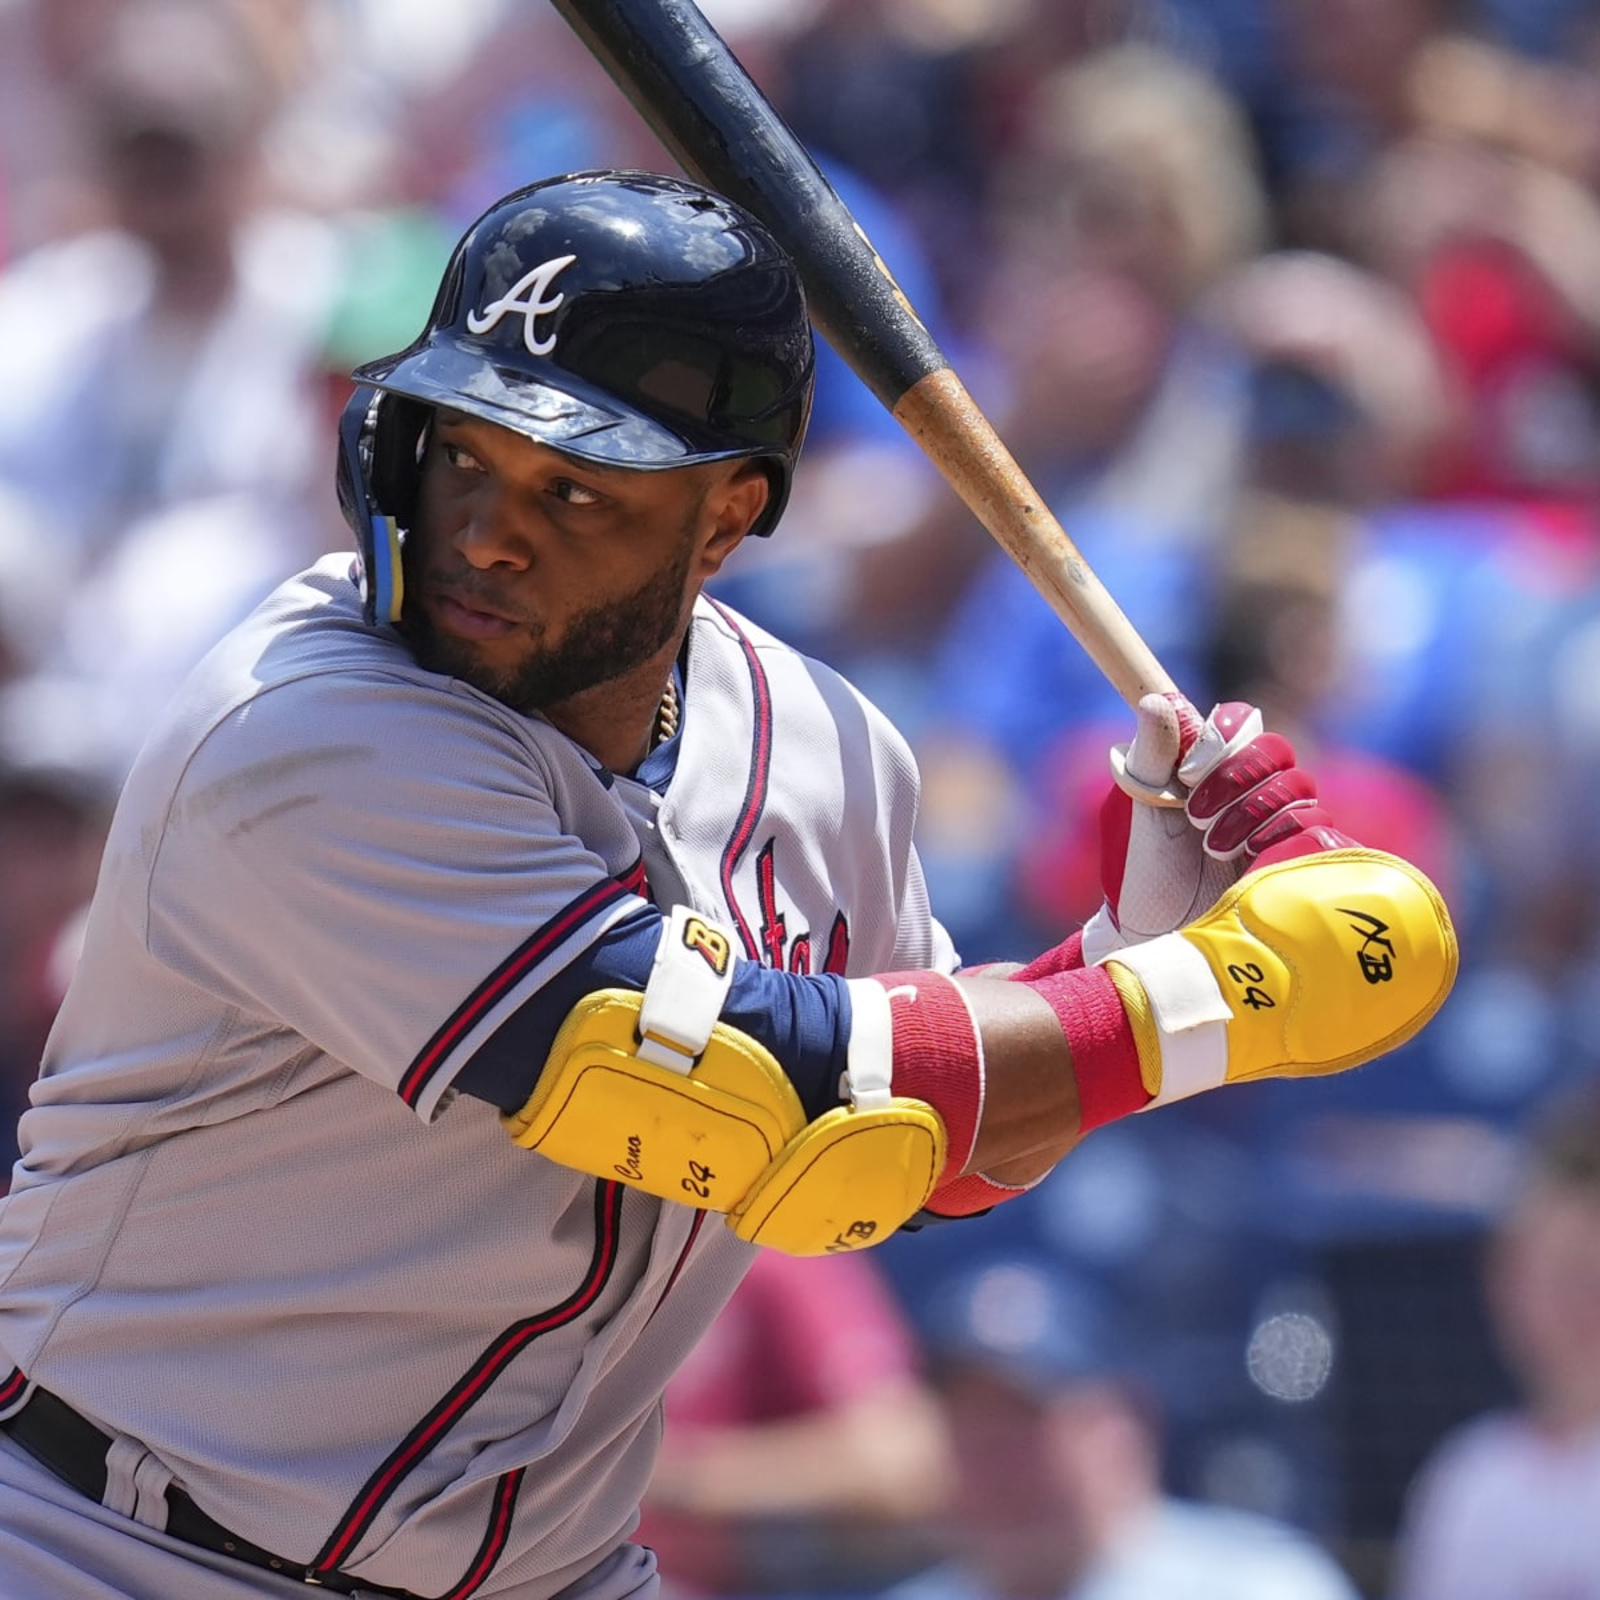 Atlanta Braves - The #Braves selected INF Robinson Canó to the